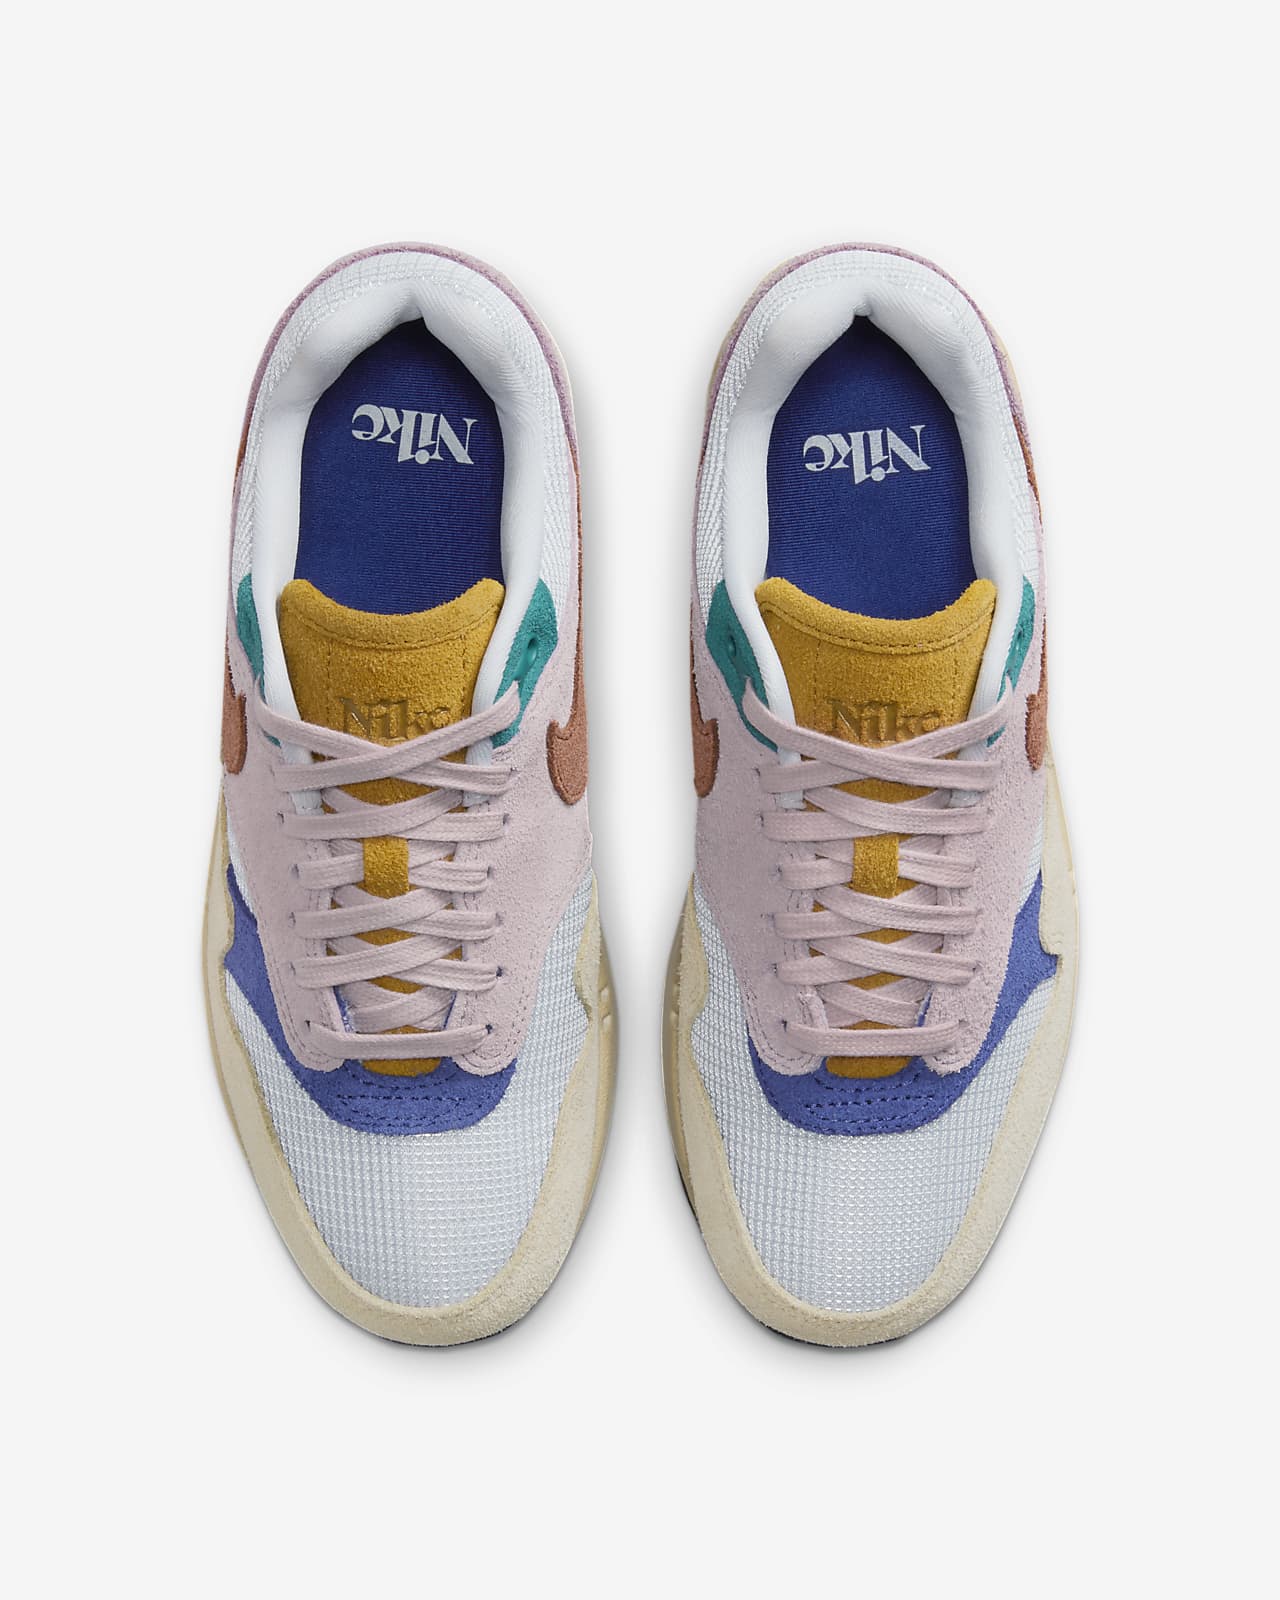 Nike WMNS Air Max 1 PRM sneakers - Gold